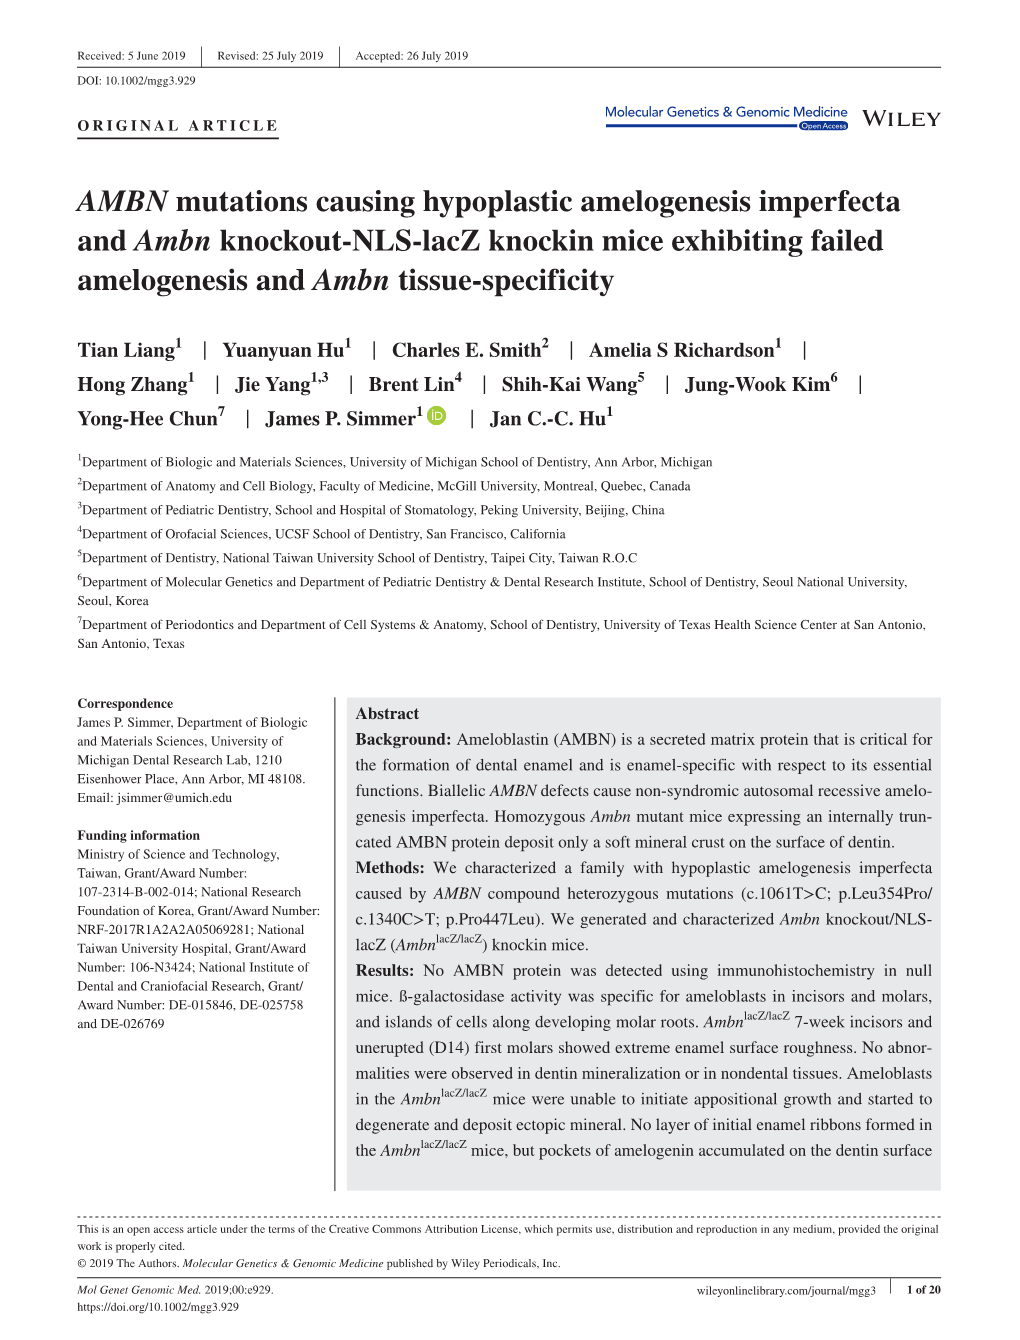 AMBN Mutations Causing Hypoplastic Amelogenesis Imperfecta and Ambn Knockout‐NLS‐Lacz Knockin Mice Exhibiting Failed Amelogenesis and Ambn Tissue‐Specificity